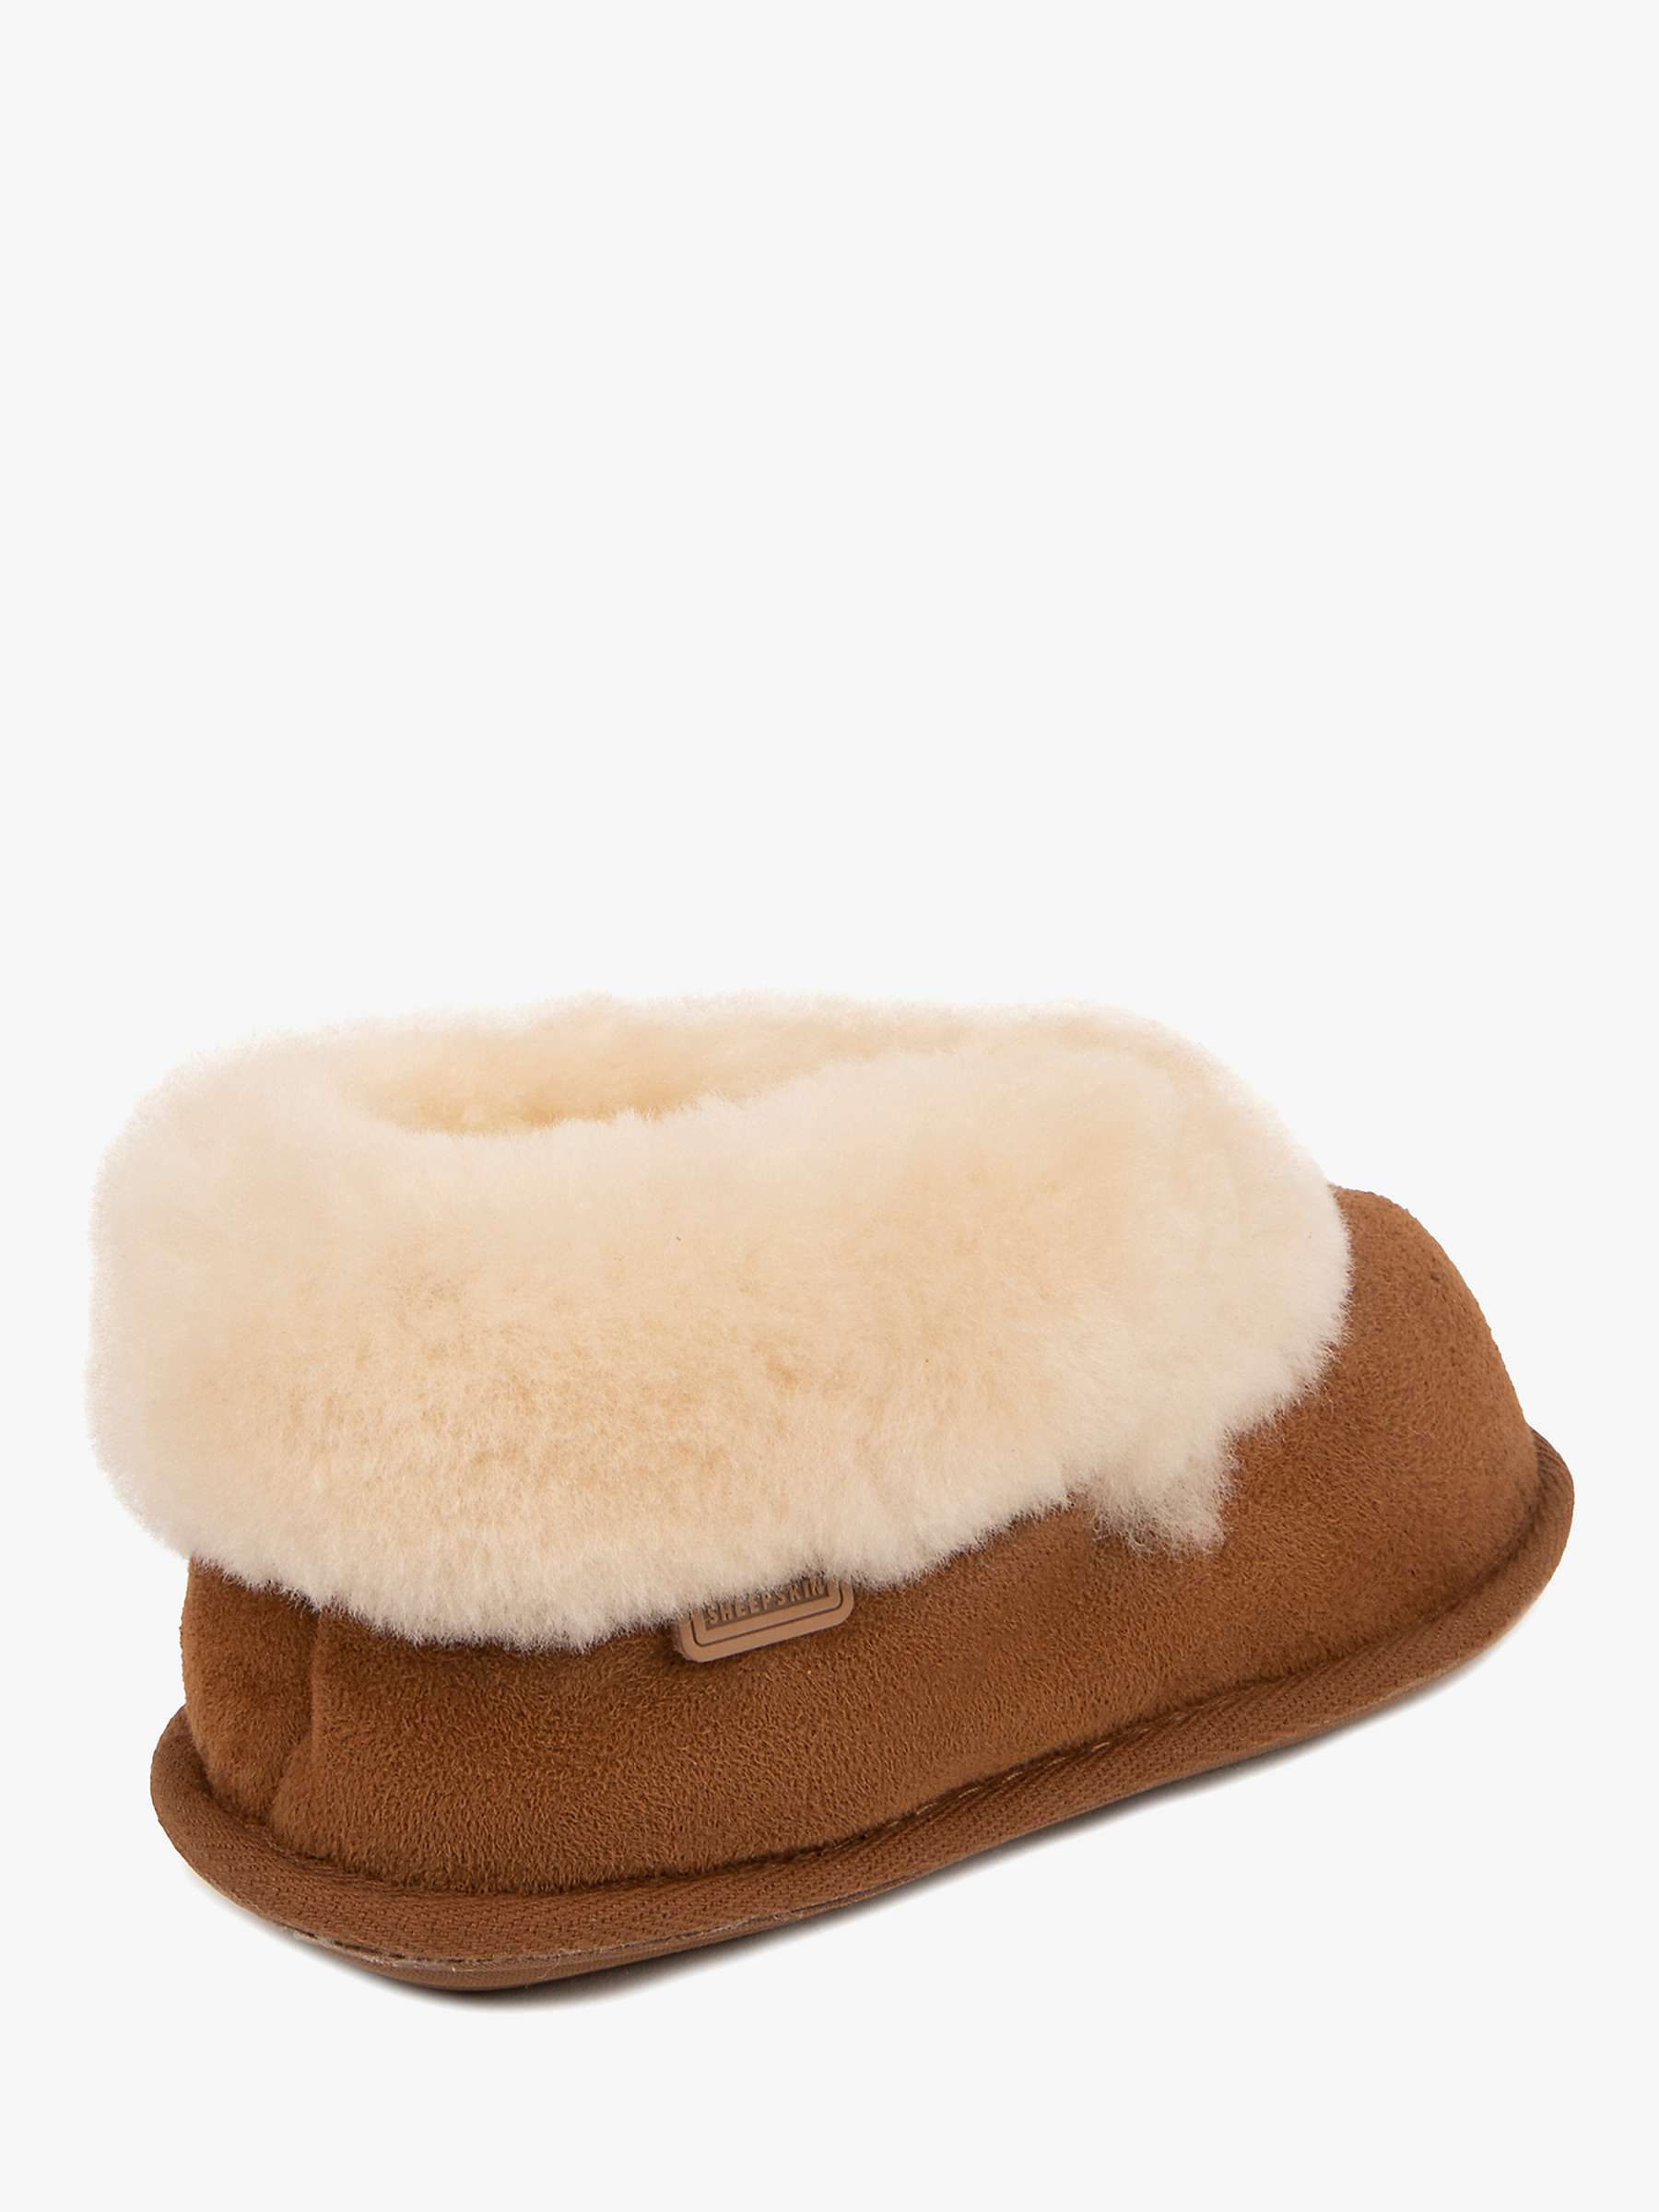 Buy Just Sheepskin Kids' Classic Slippers Online at johnlewis.com